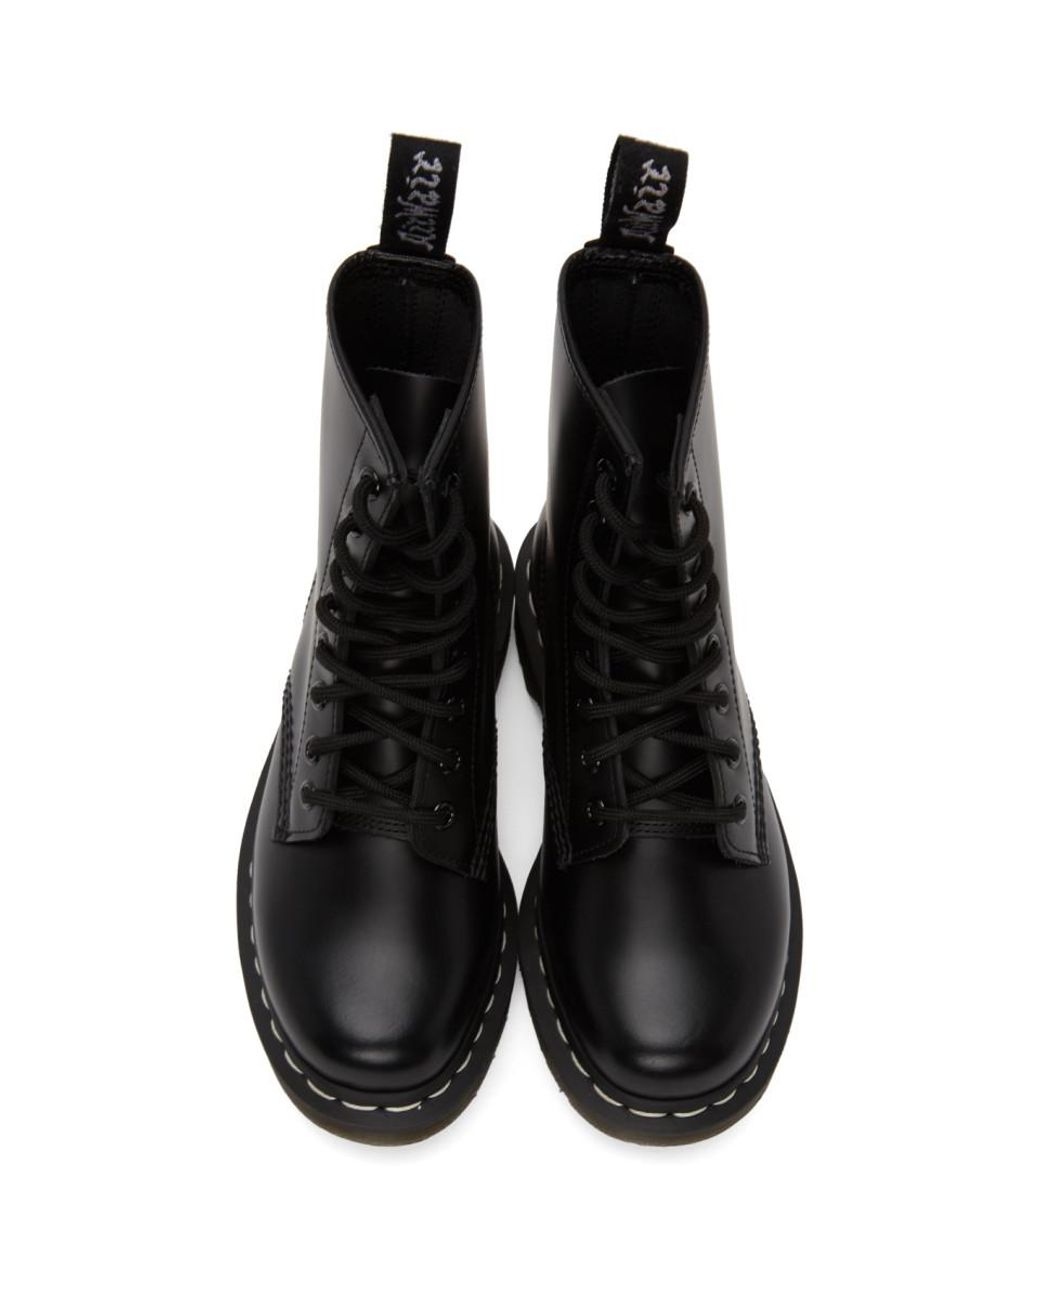 Dr. Martens 1460 Contrast Stitch Smooth Leather Boots in Black | Lyst UK